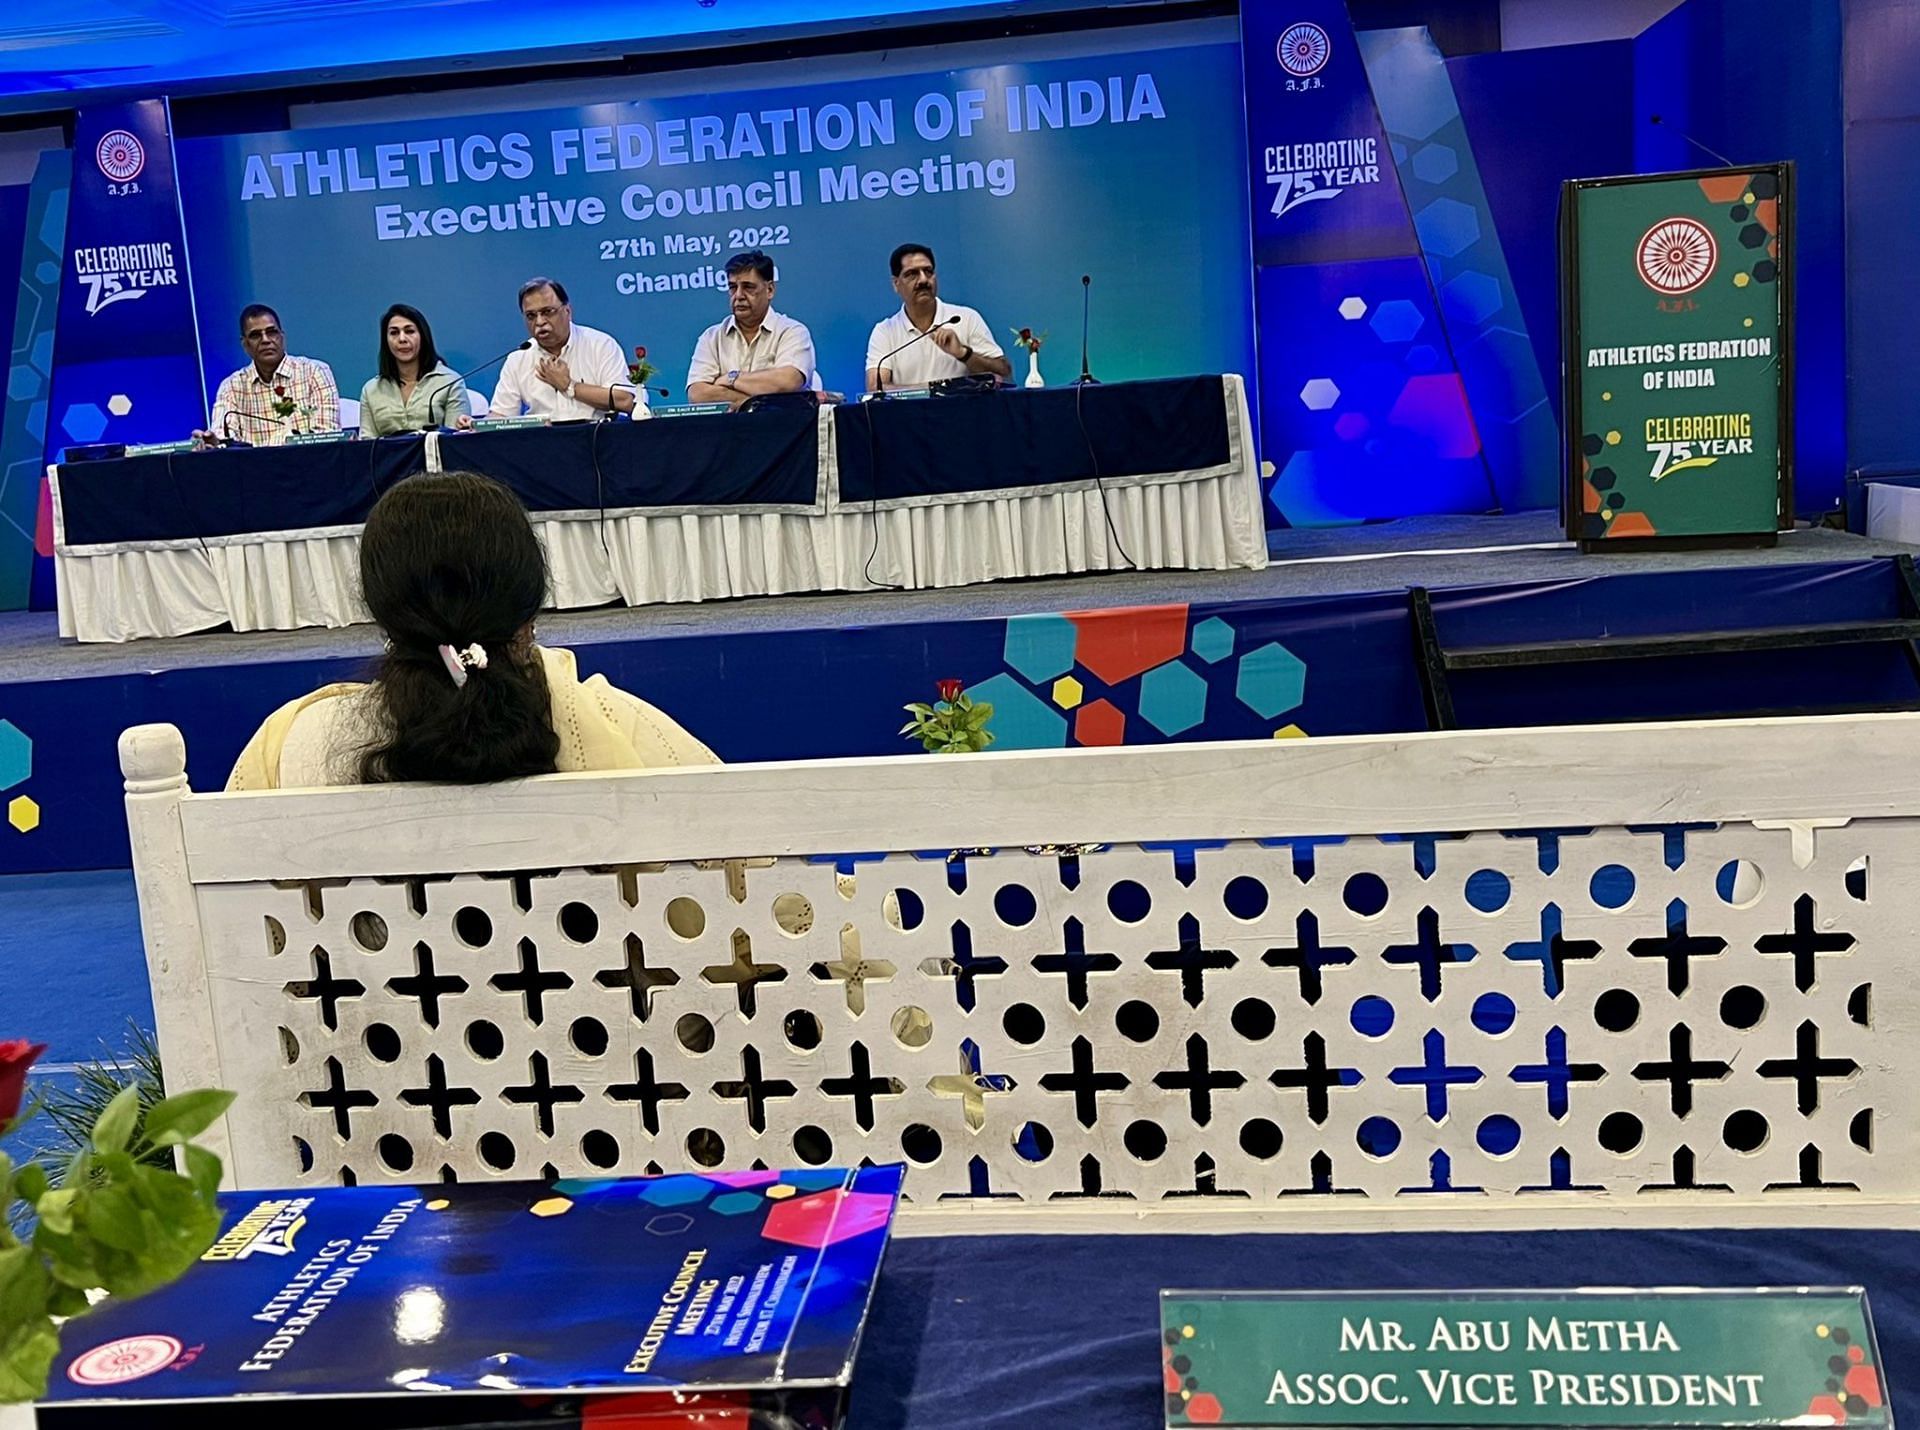 The Athletics Federation of India has invited the warring president and secretary of PAA to Delhi for deliberations | Image from the AFI General Meeting/Abu Metha